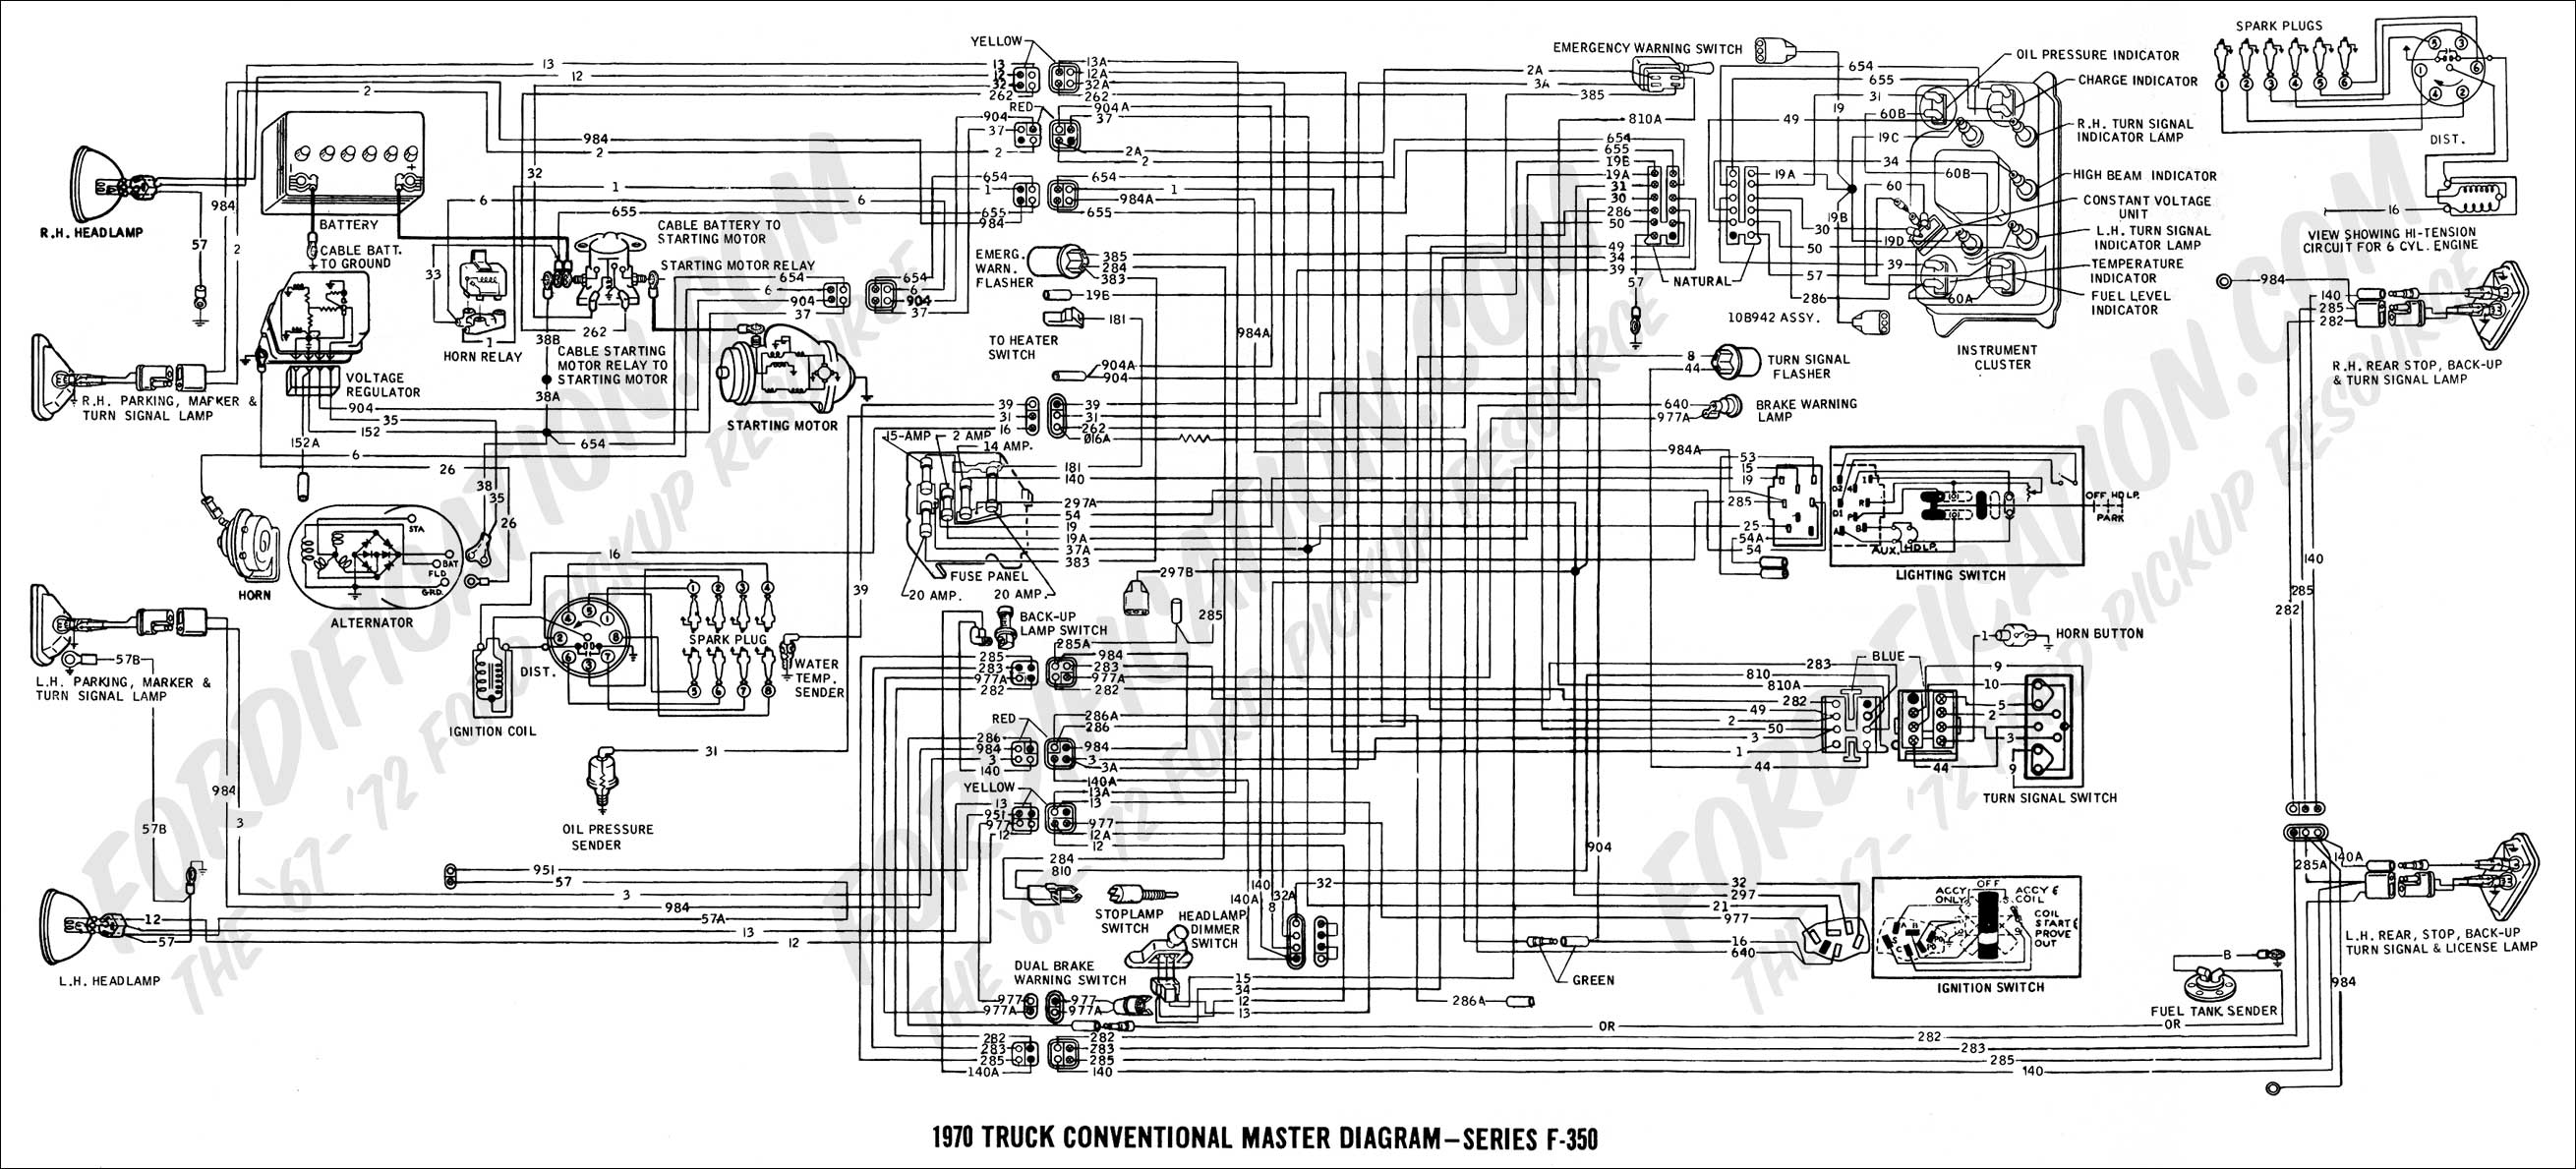 Ford Truck Technical Drawings and Schematics - Section H - Wiring Diagrams  1970 Ford F350 Wiring Diagram    FORDification.com